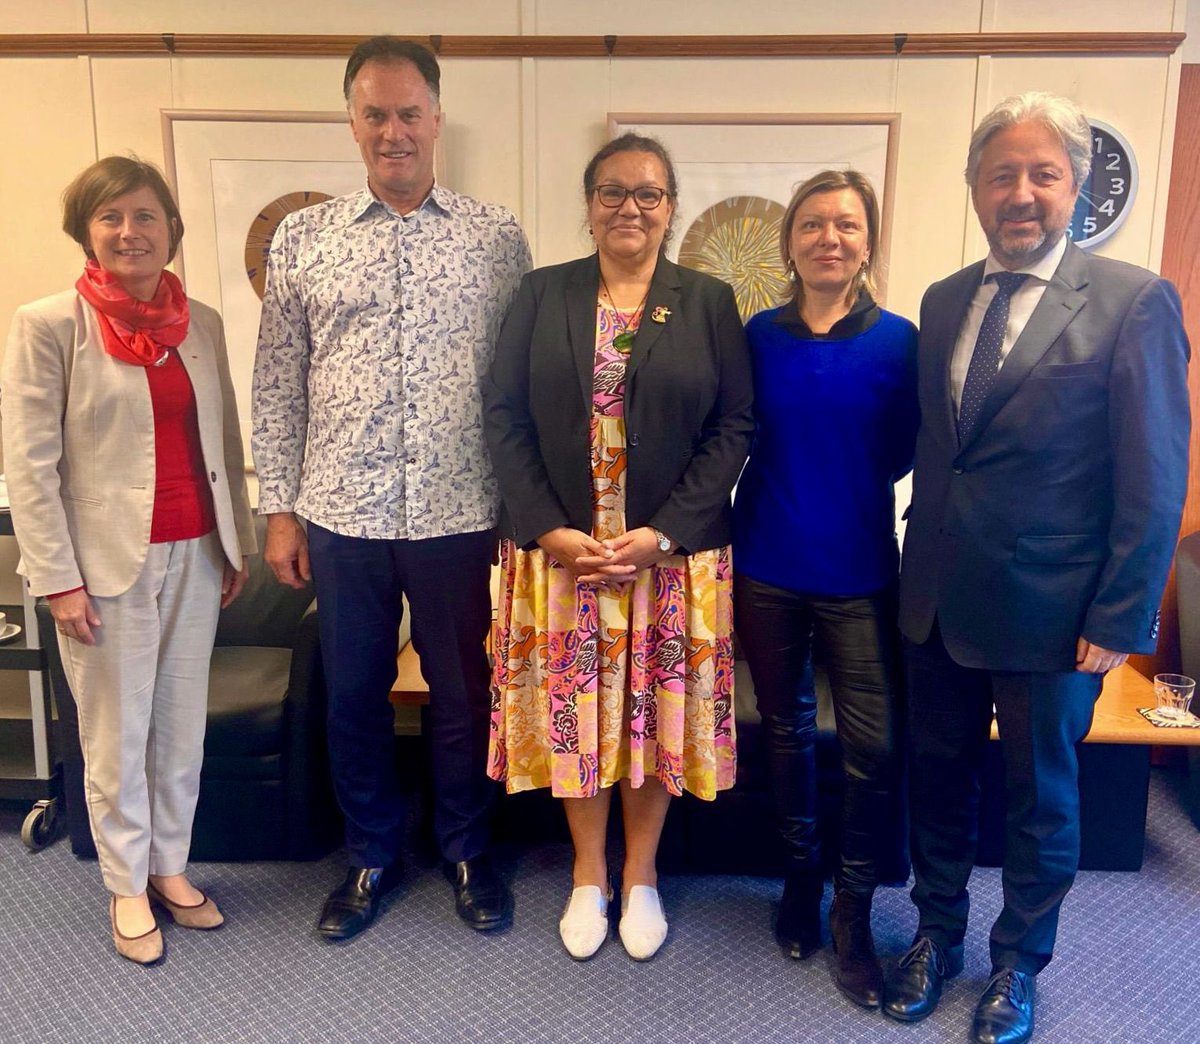 An insightful meeting with Dunedin Mayor Jules Radich with Honorary Consul Christiane Leurquin & 🇫🇷 Embassy’s cultural team. Fantastic to learn of Mayor Radich’s dedication to urban mobility projects, such as electric tram, to mitigate GHG emissions🌿